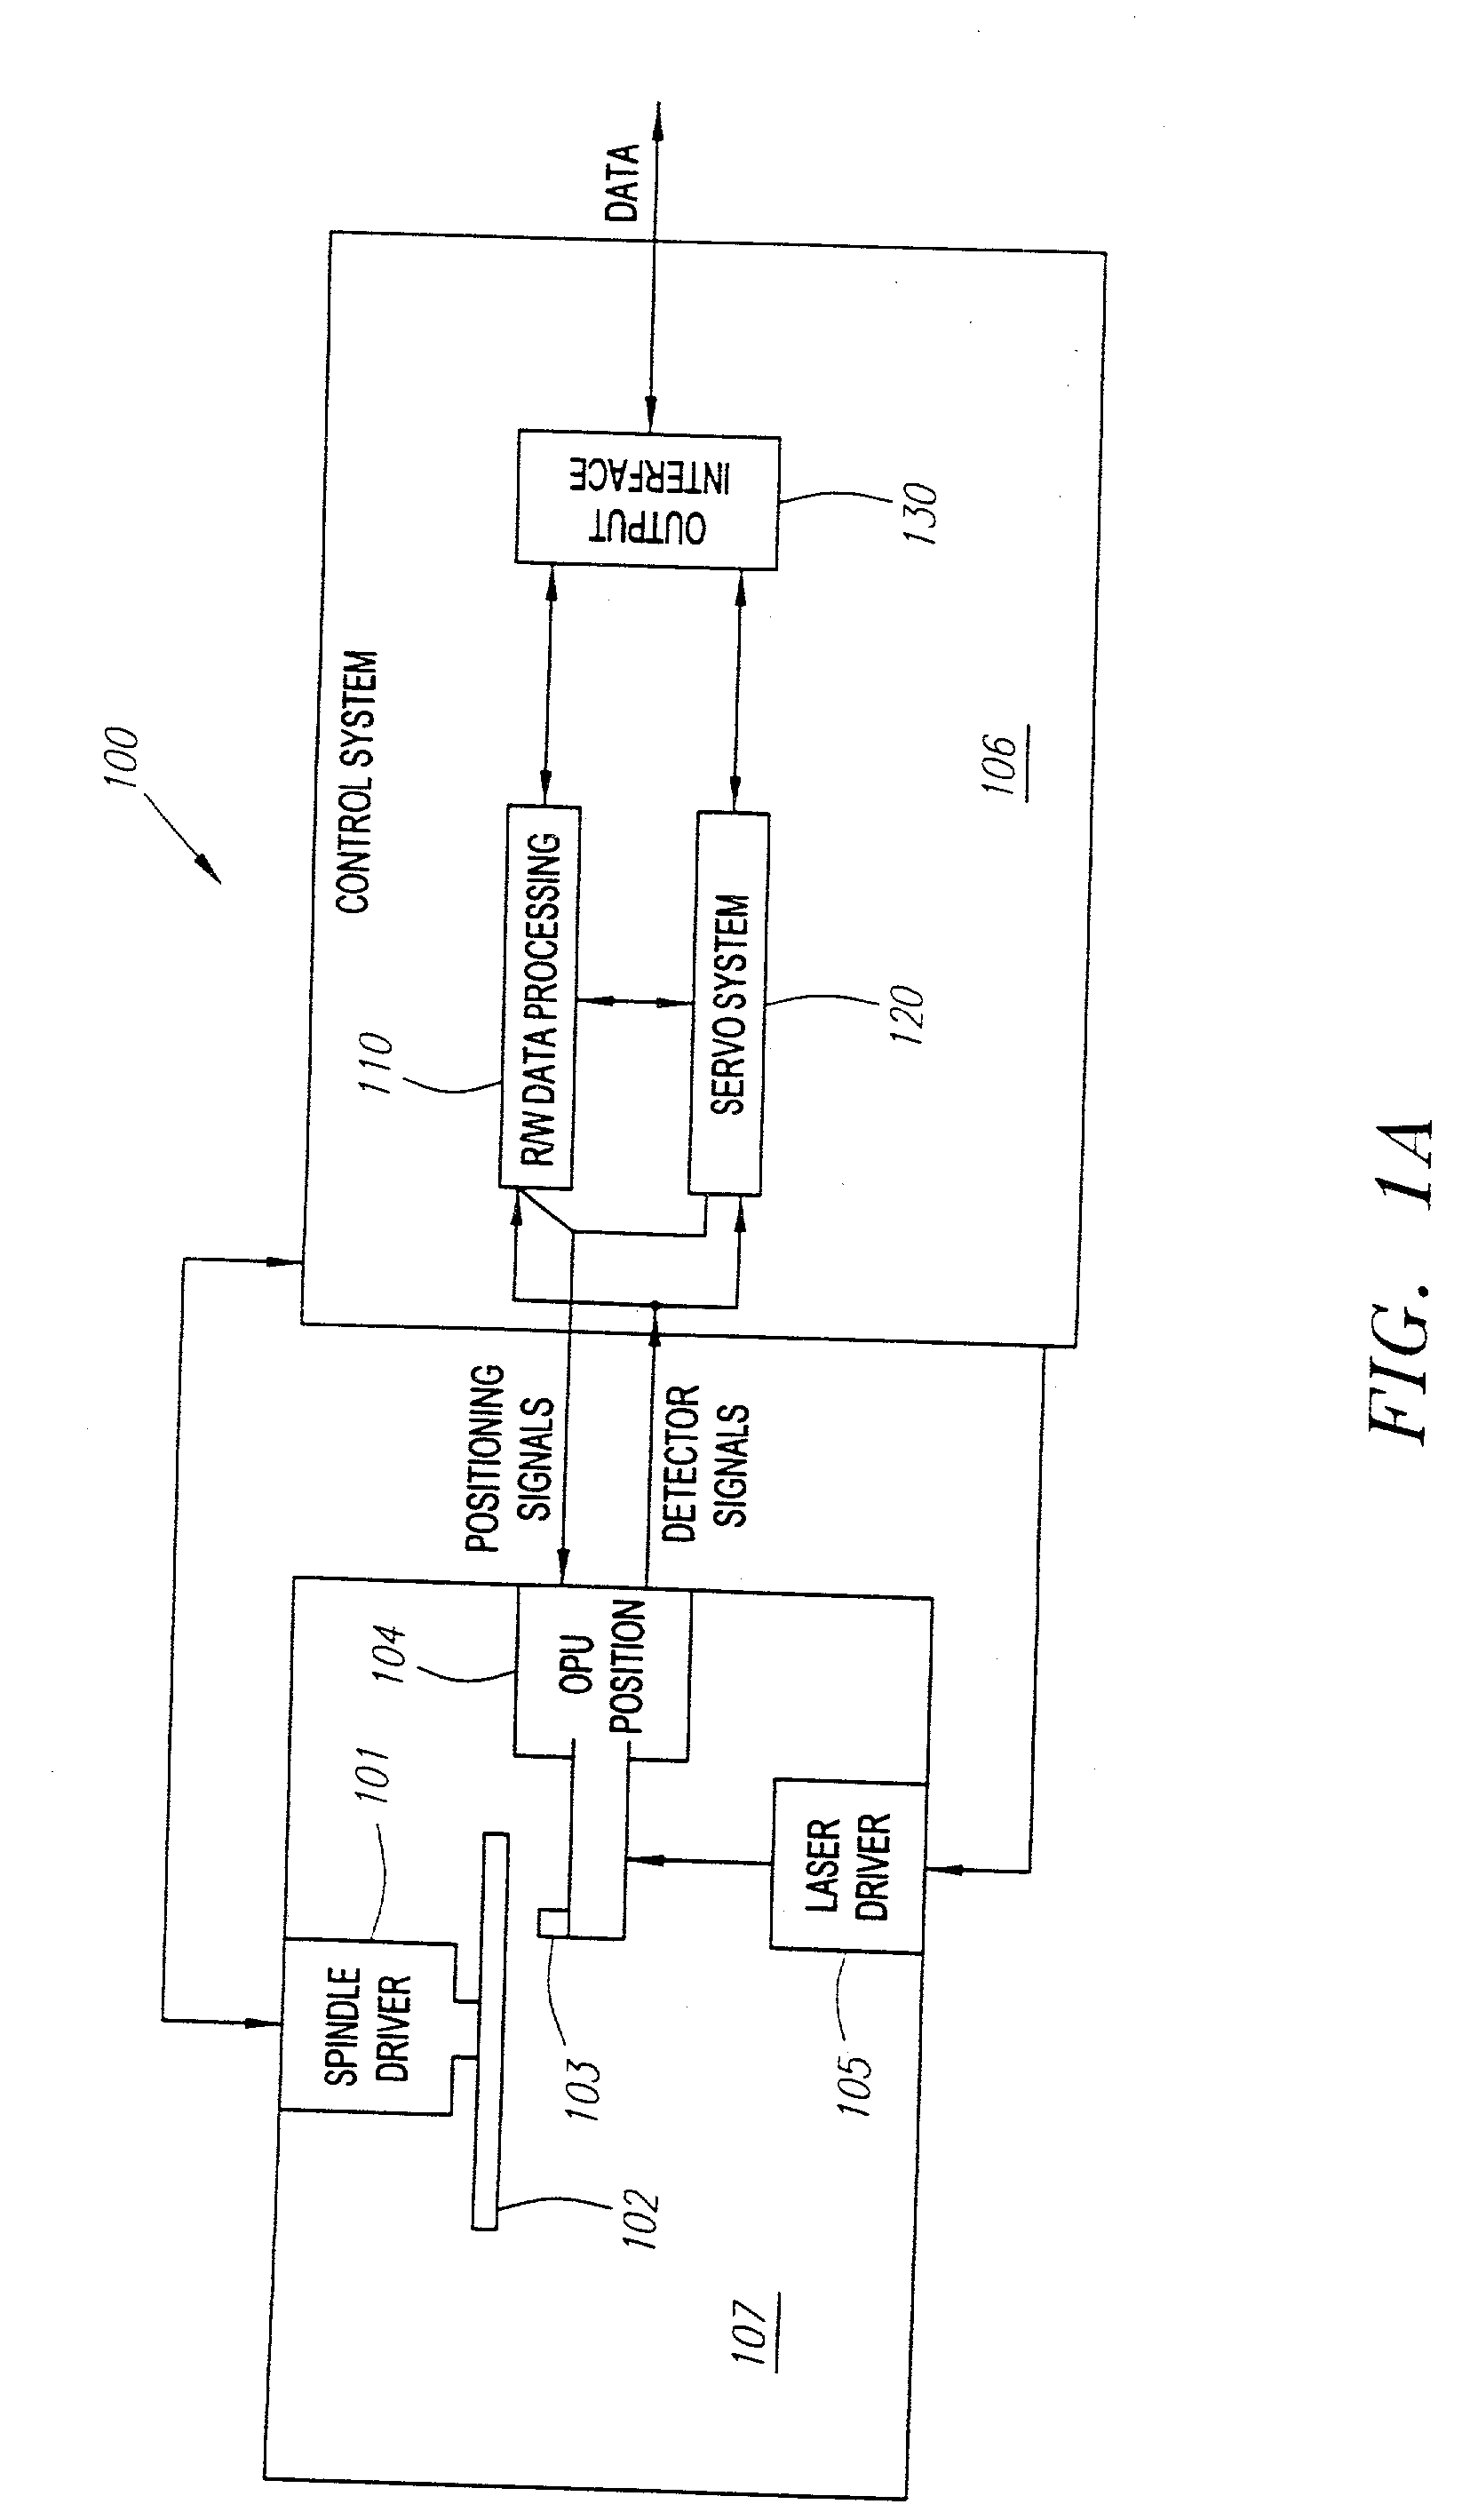 Calibration of tracking error signal gain in a tracking servo system